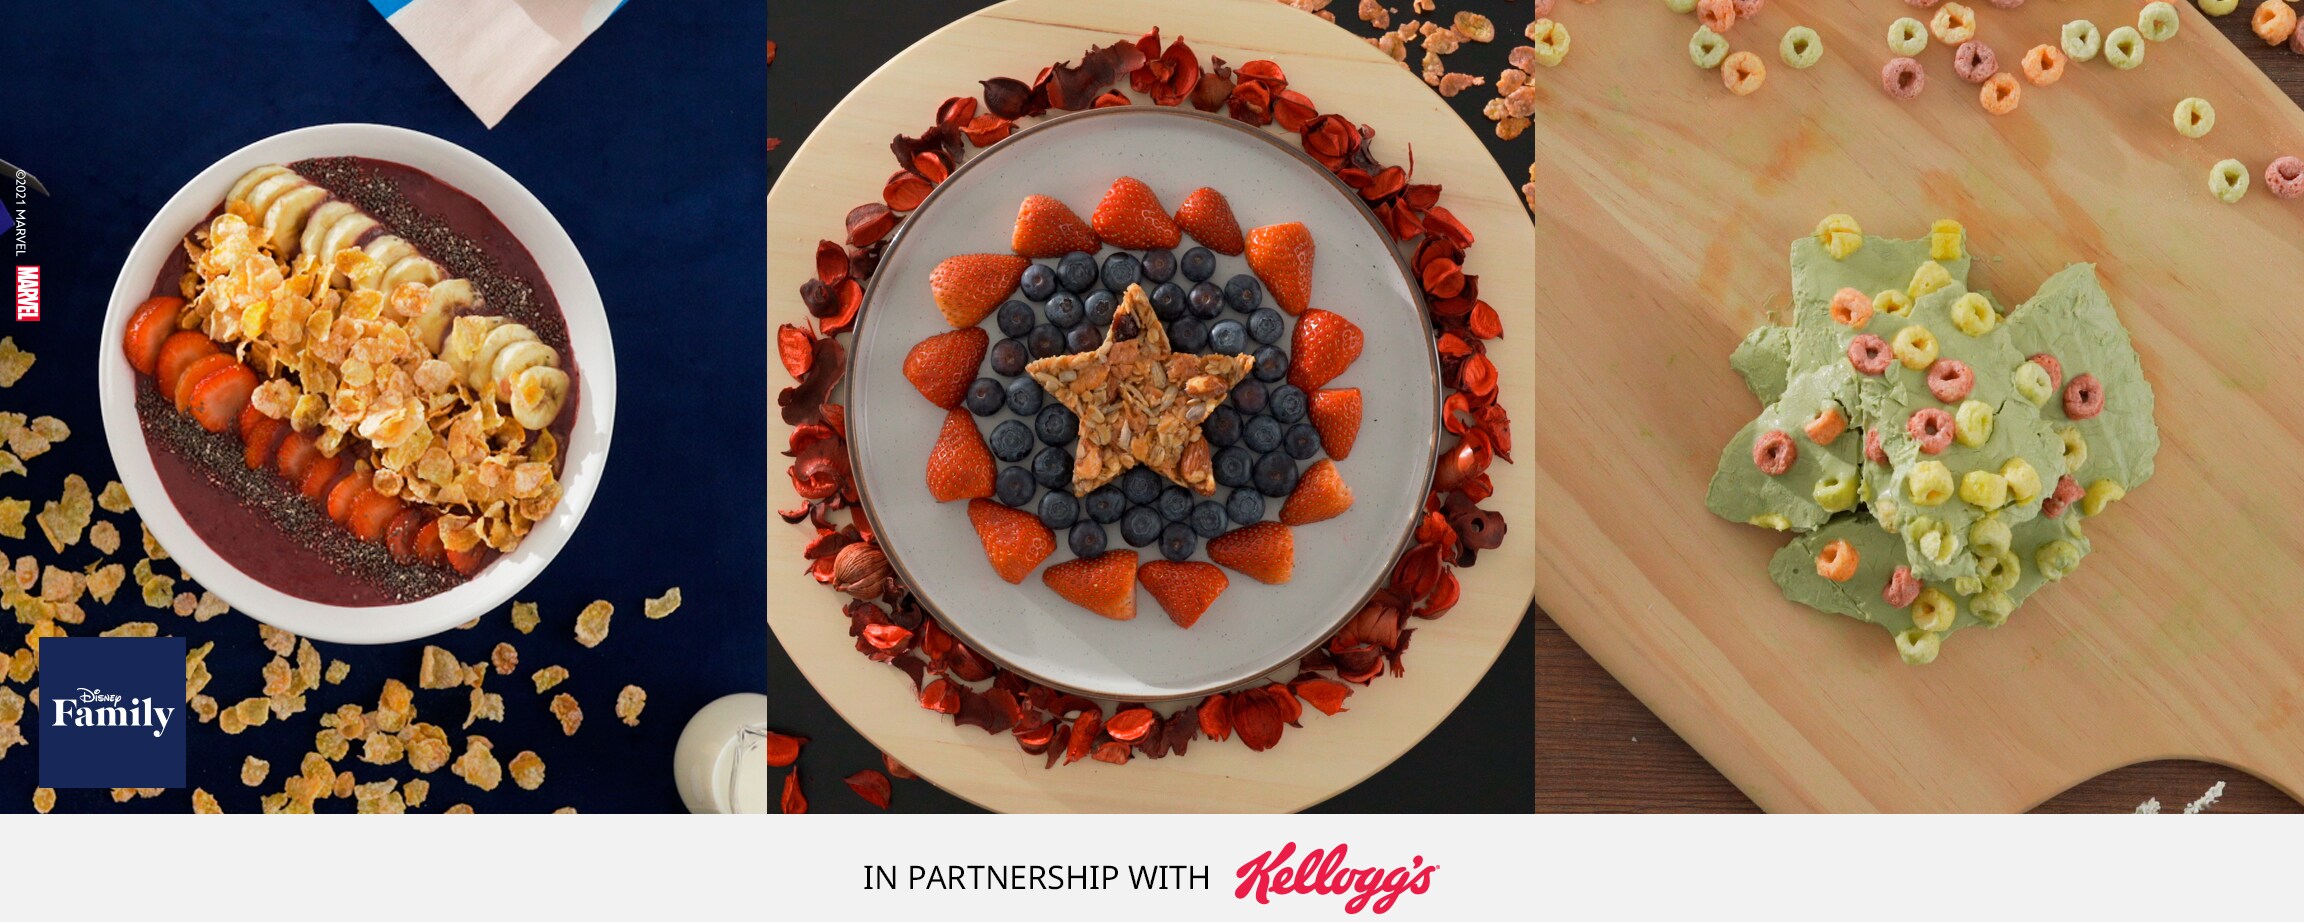 Power Up Your Mornings With Delicious Kellogg’s Breakfast Recipes Inspired By MARVEL Super Heroes!